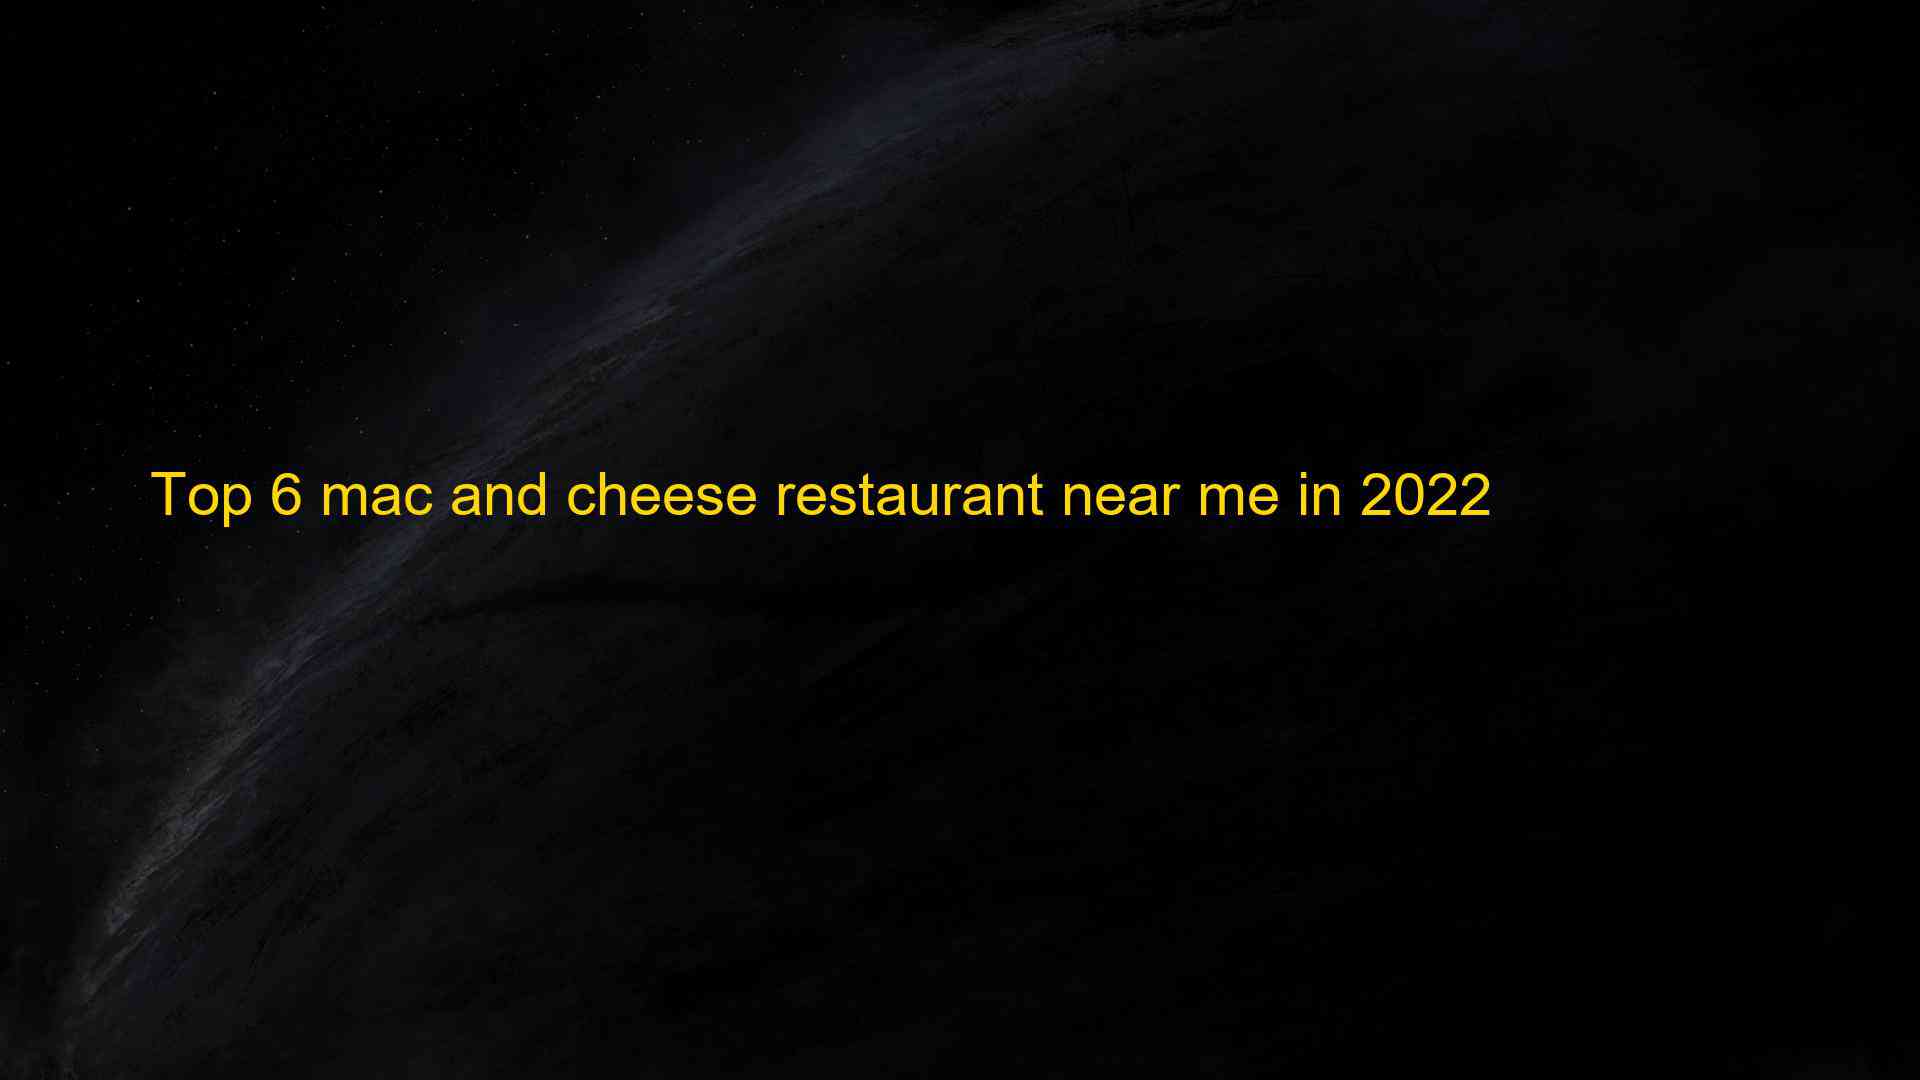 Top 6 mac and cheese restaurant near me in 2022 1663389157